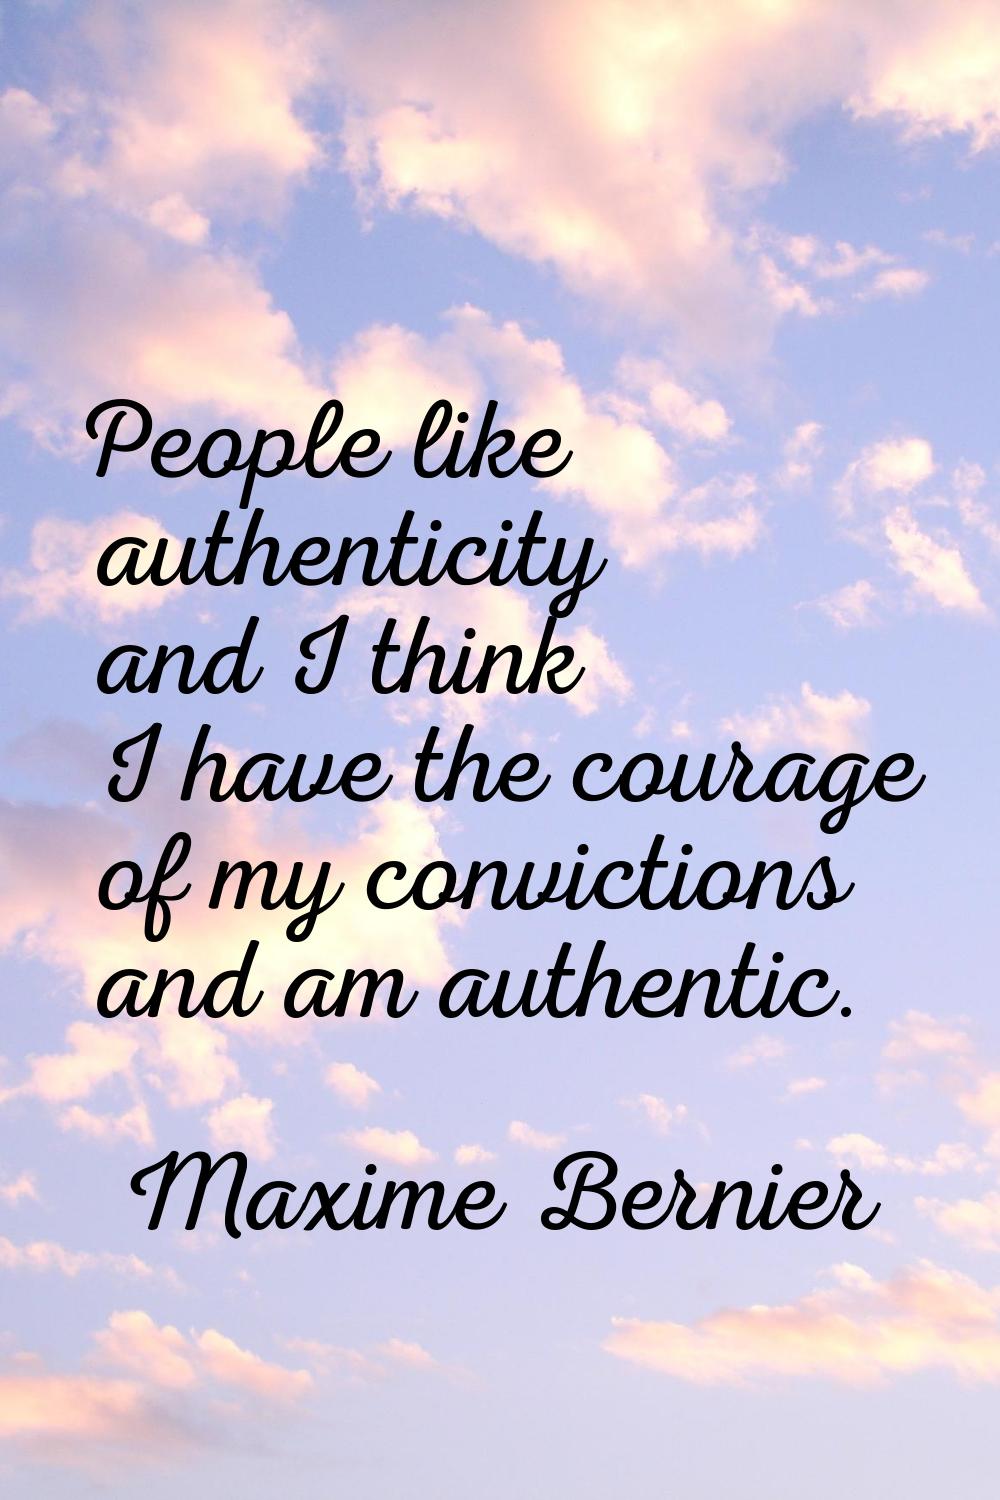 People like authenticity and I think I have the courage of my convictions and am authentic.